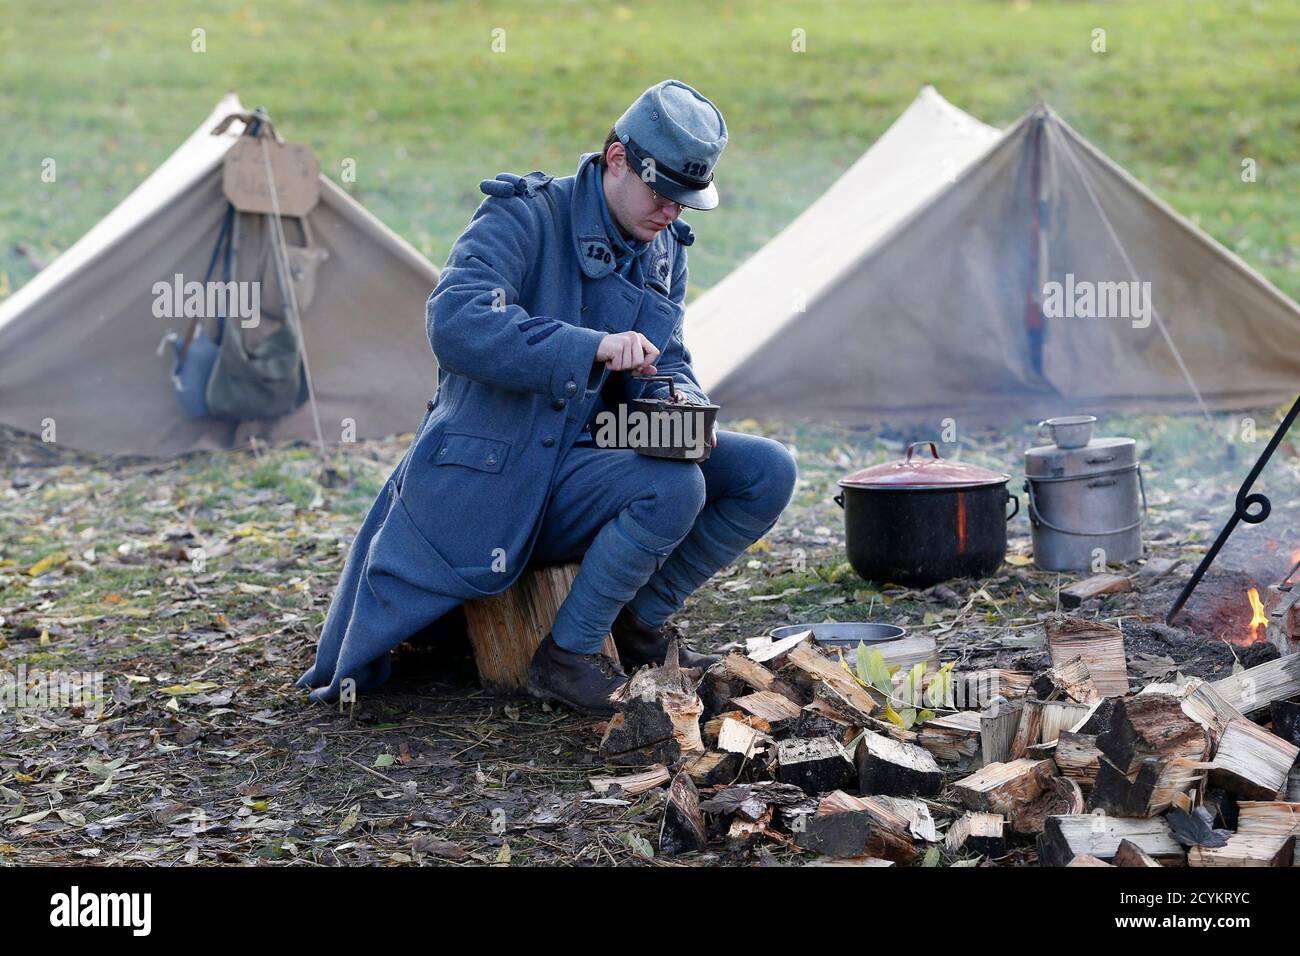 Andy, member of World War One Historical Association '14-18 en Somme', dressed with vintage army uniforms as Poilu (French soldier in World War I) grinds coffee at a bivouac camp in Fouilloy, Northern France, November 10, 2013. The historical association '14-18 en Somme' was created in August 2009 by French history teacher Sylvain Pinard with the aim of keeping alive the memory of the soldiers of World War One, and promoting understanding of the battles of the Great War. Armed with their motto 'Never forget, always remember', the 30 members live, eat and sleep in the same conditions as the sol Stock Photo